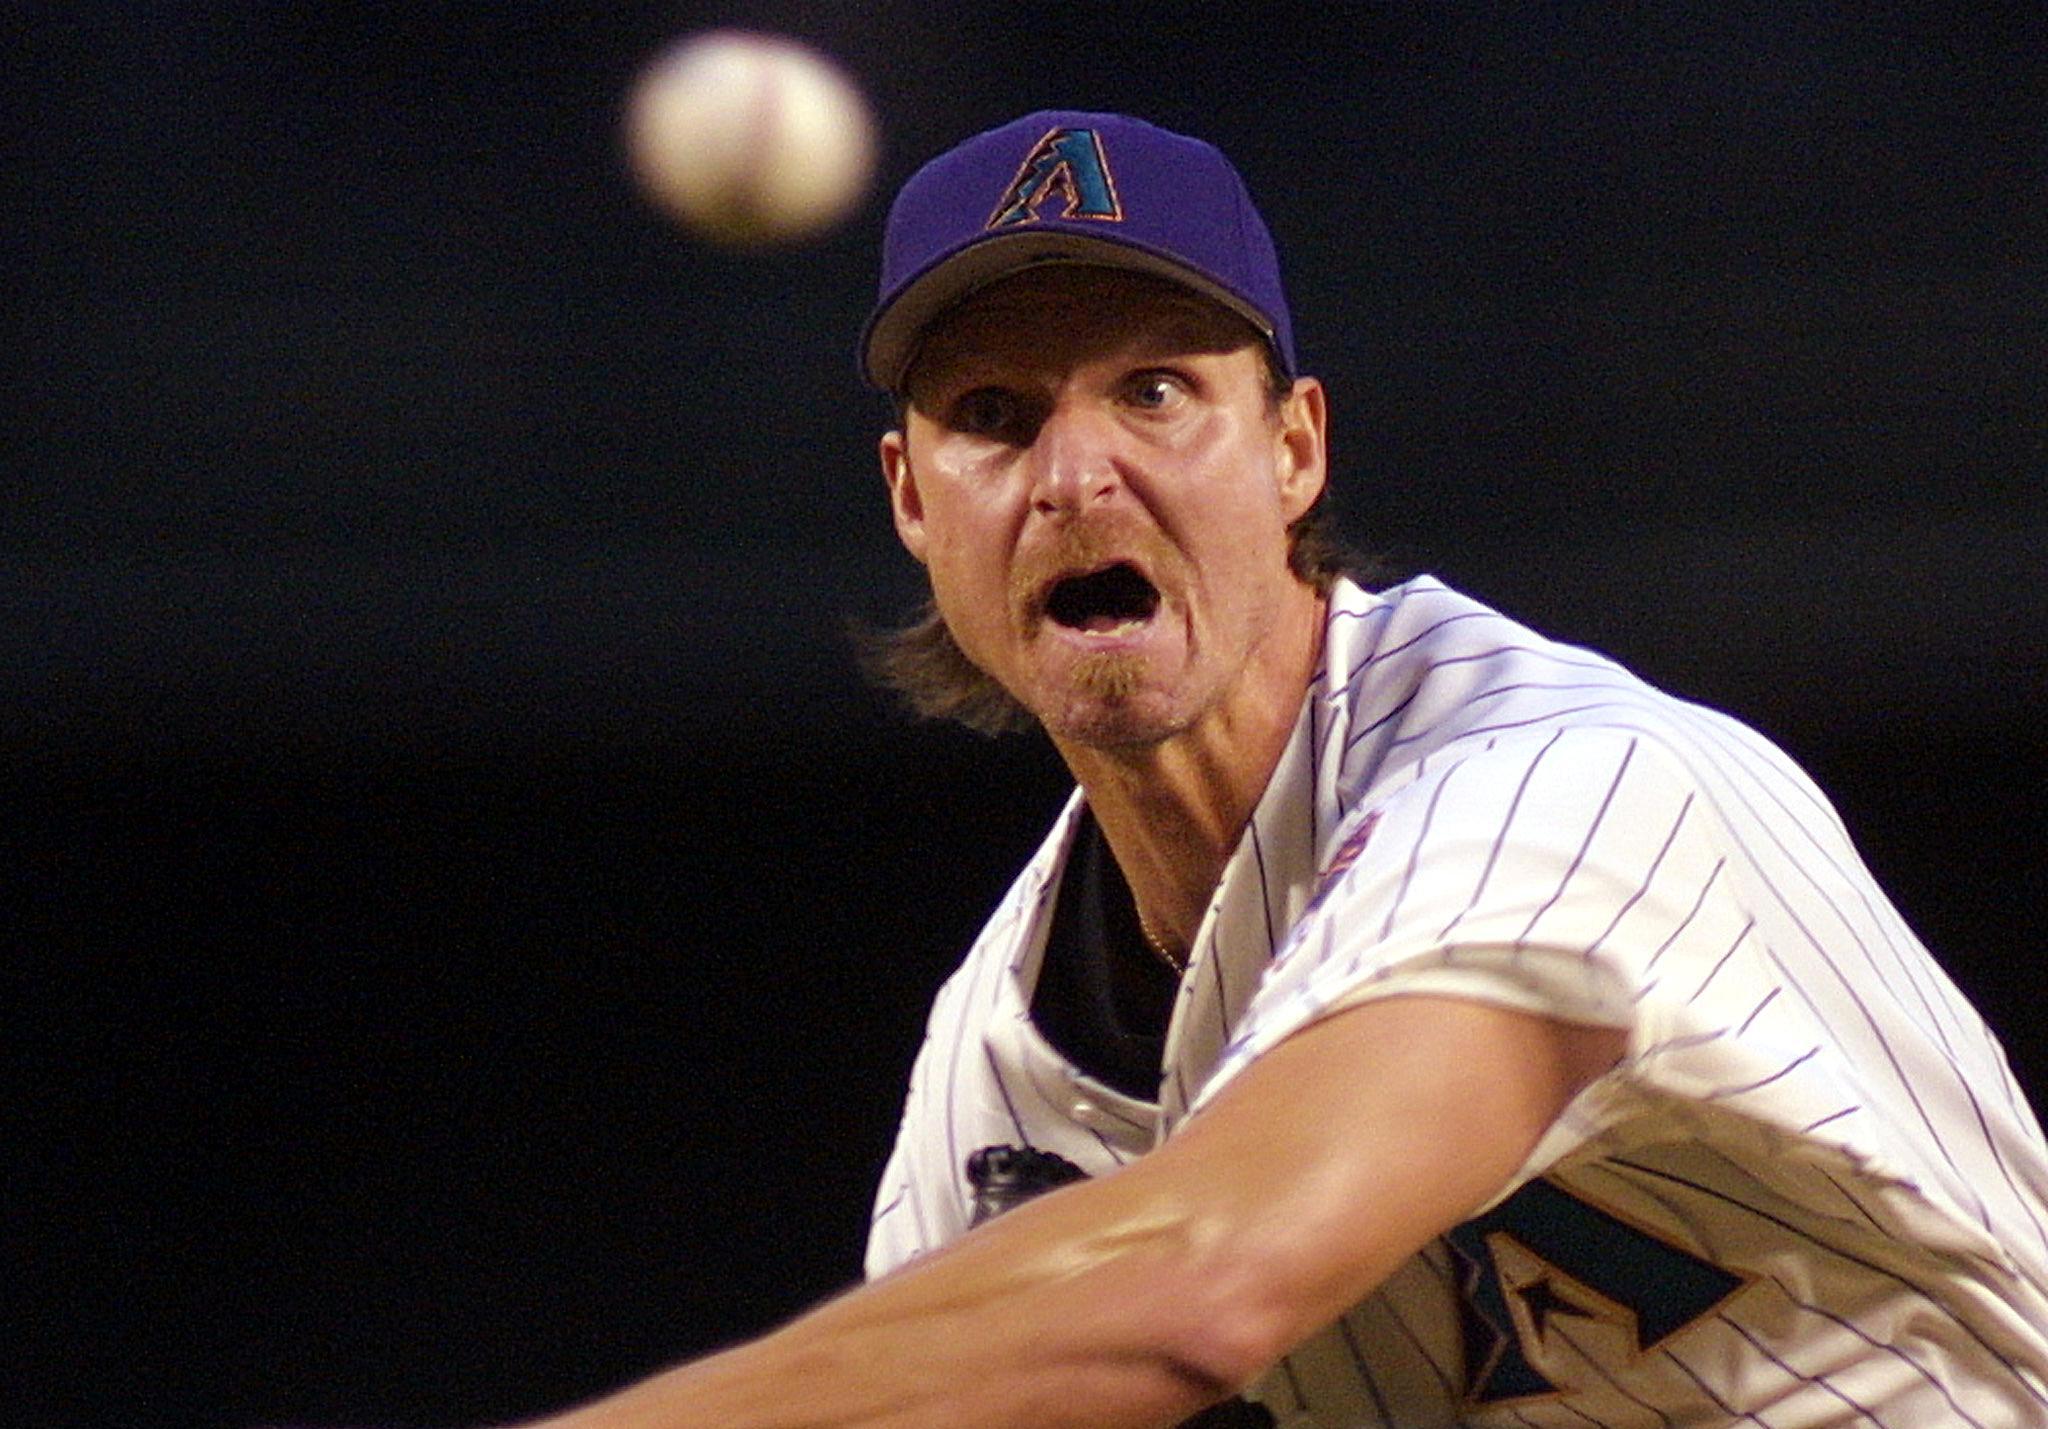 Arizona Diamondbacks starter Randy Johnson pitches against the Florida Marlins during the second inning 23 April 2001 in Phoenix. AFP Photo/Mike FIALA (Photo by Mike FIALA / AFP) (Photo by MIKE FIALA/AFP via Getty Images)